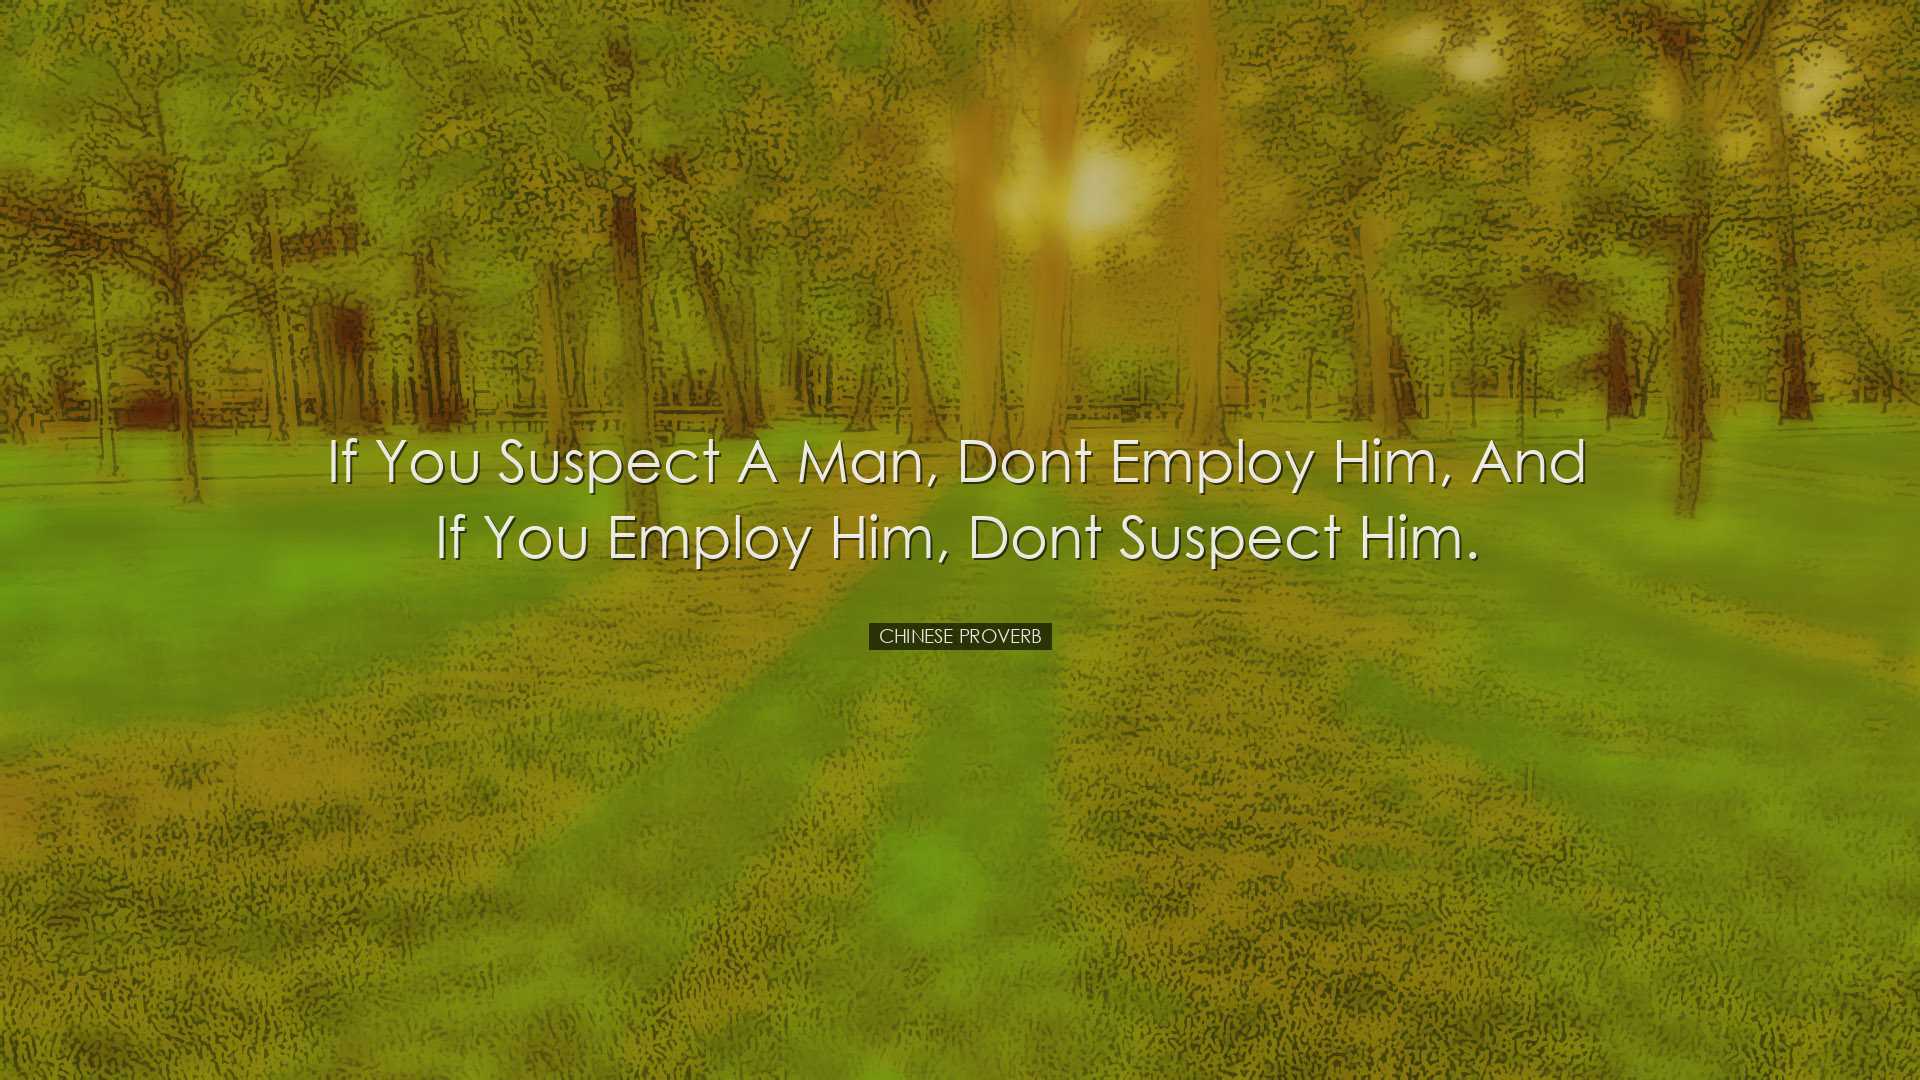 If you suspect a man, dont employ him, and if you employ him, dont